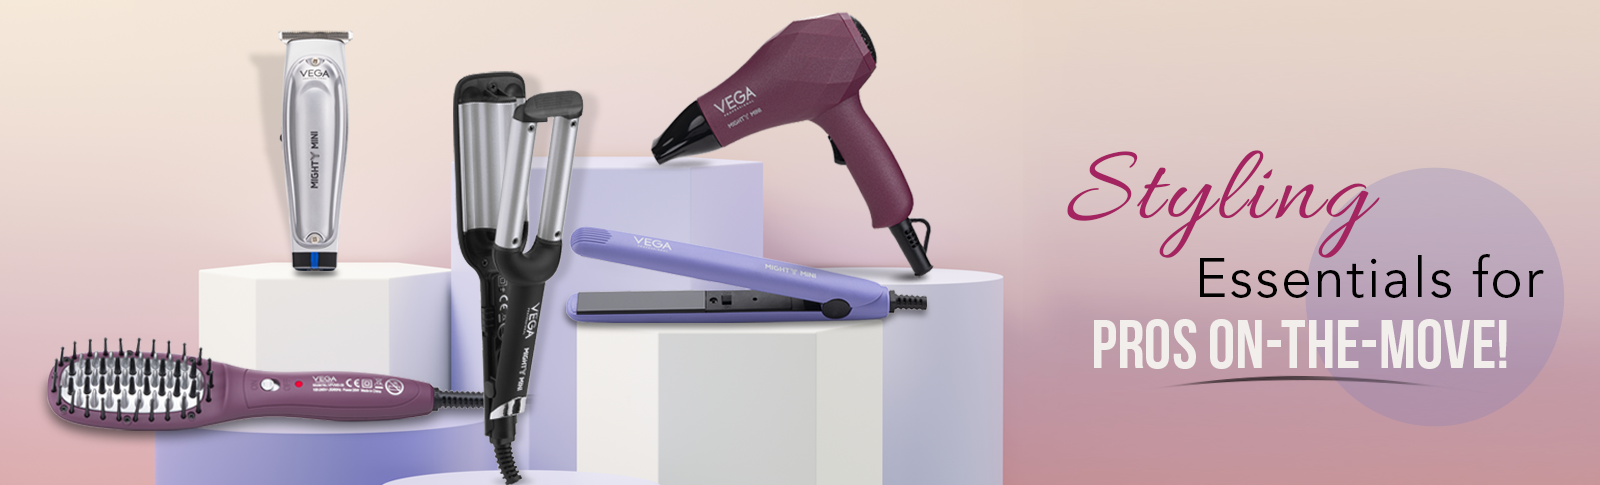 Professional-Hair-Styling-Tools